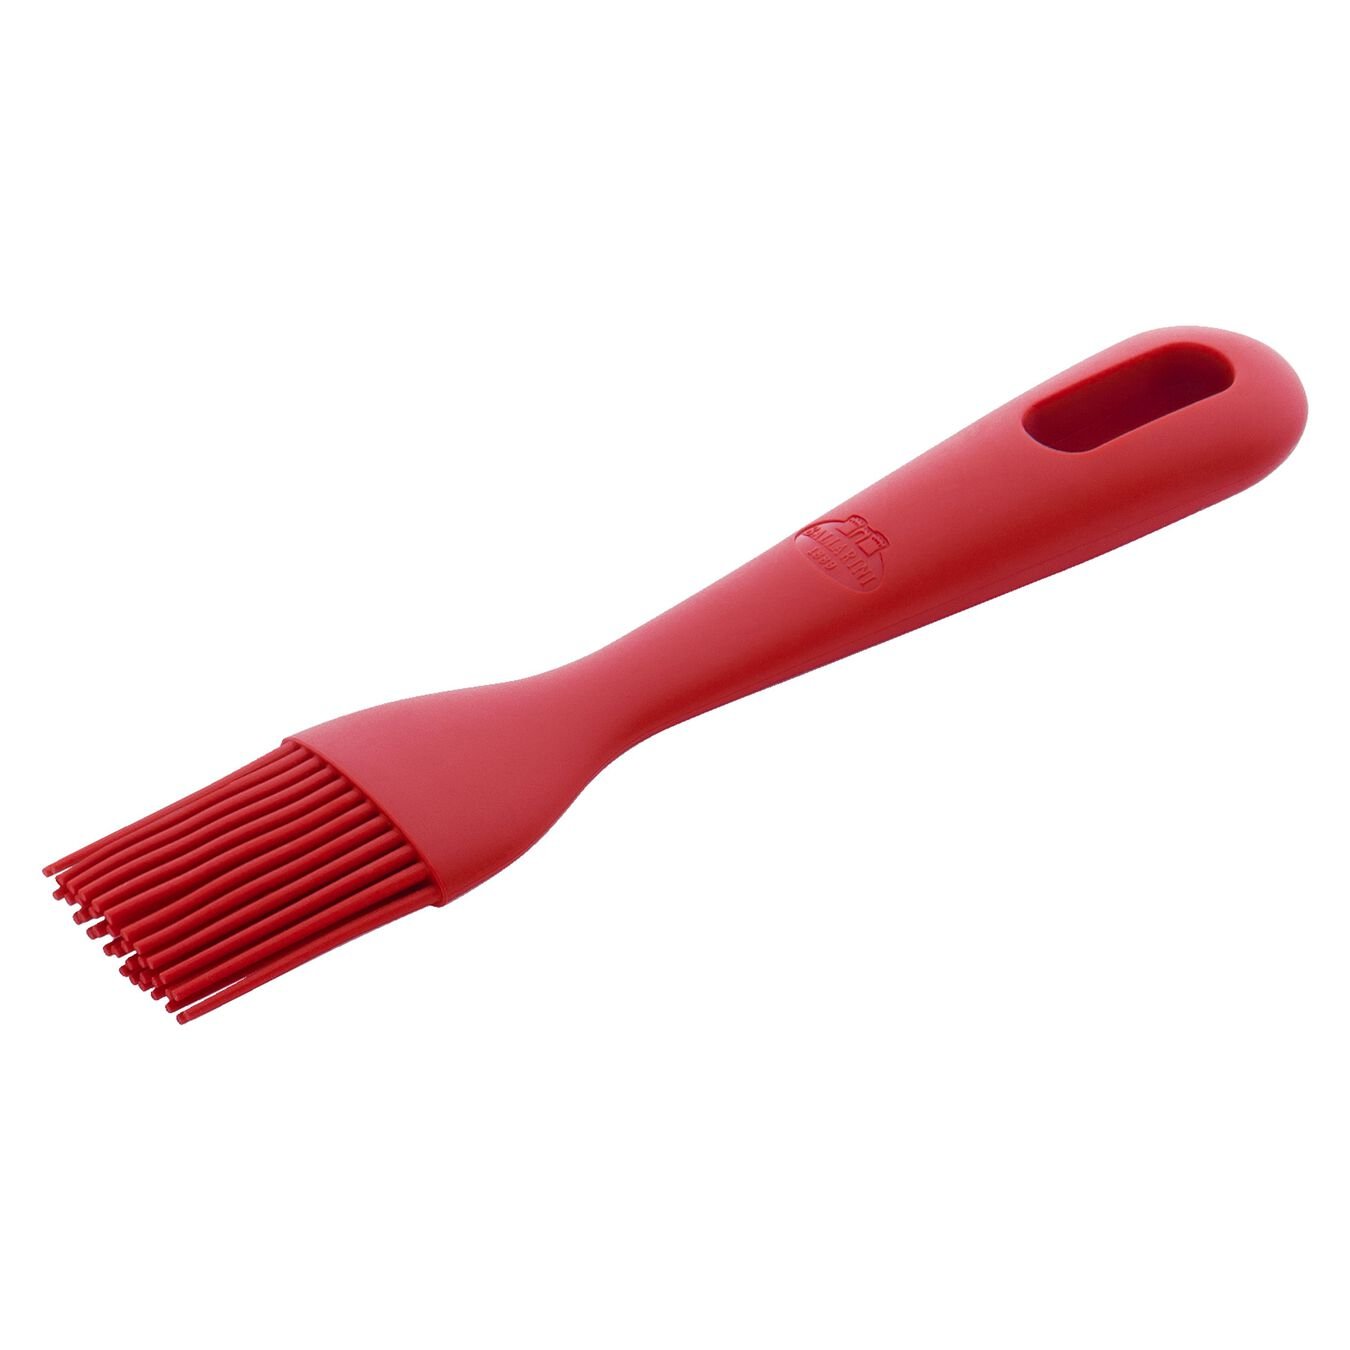 17 cm silicone Pastry brush, red,,large 1